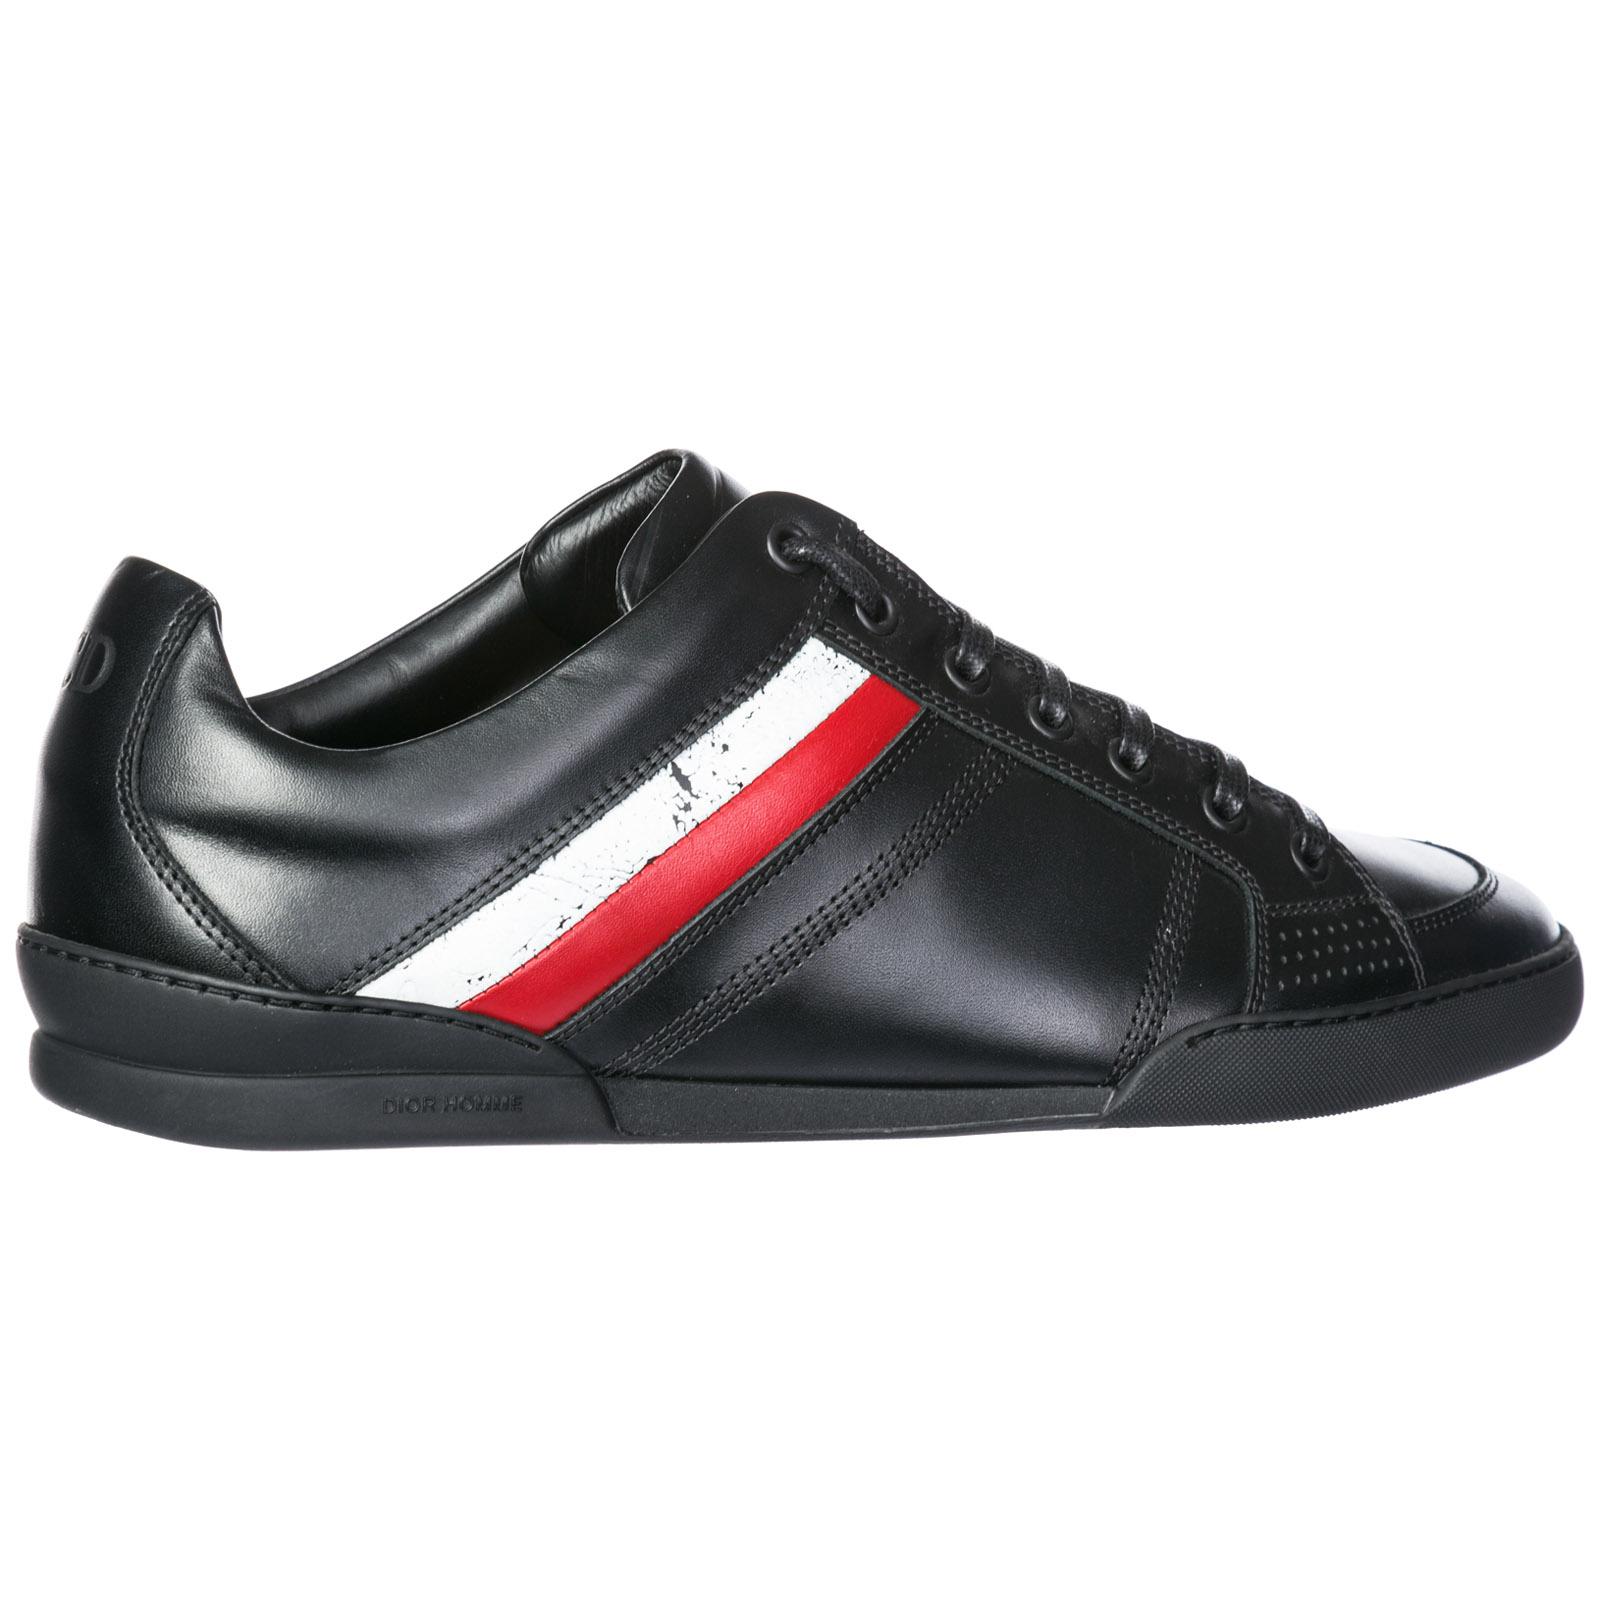 Dior Shoes Leather Trainers Sneakers in Black for Men - Lyst